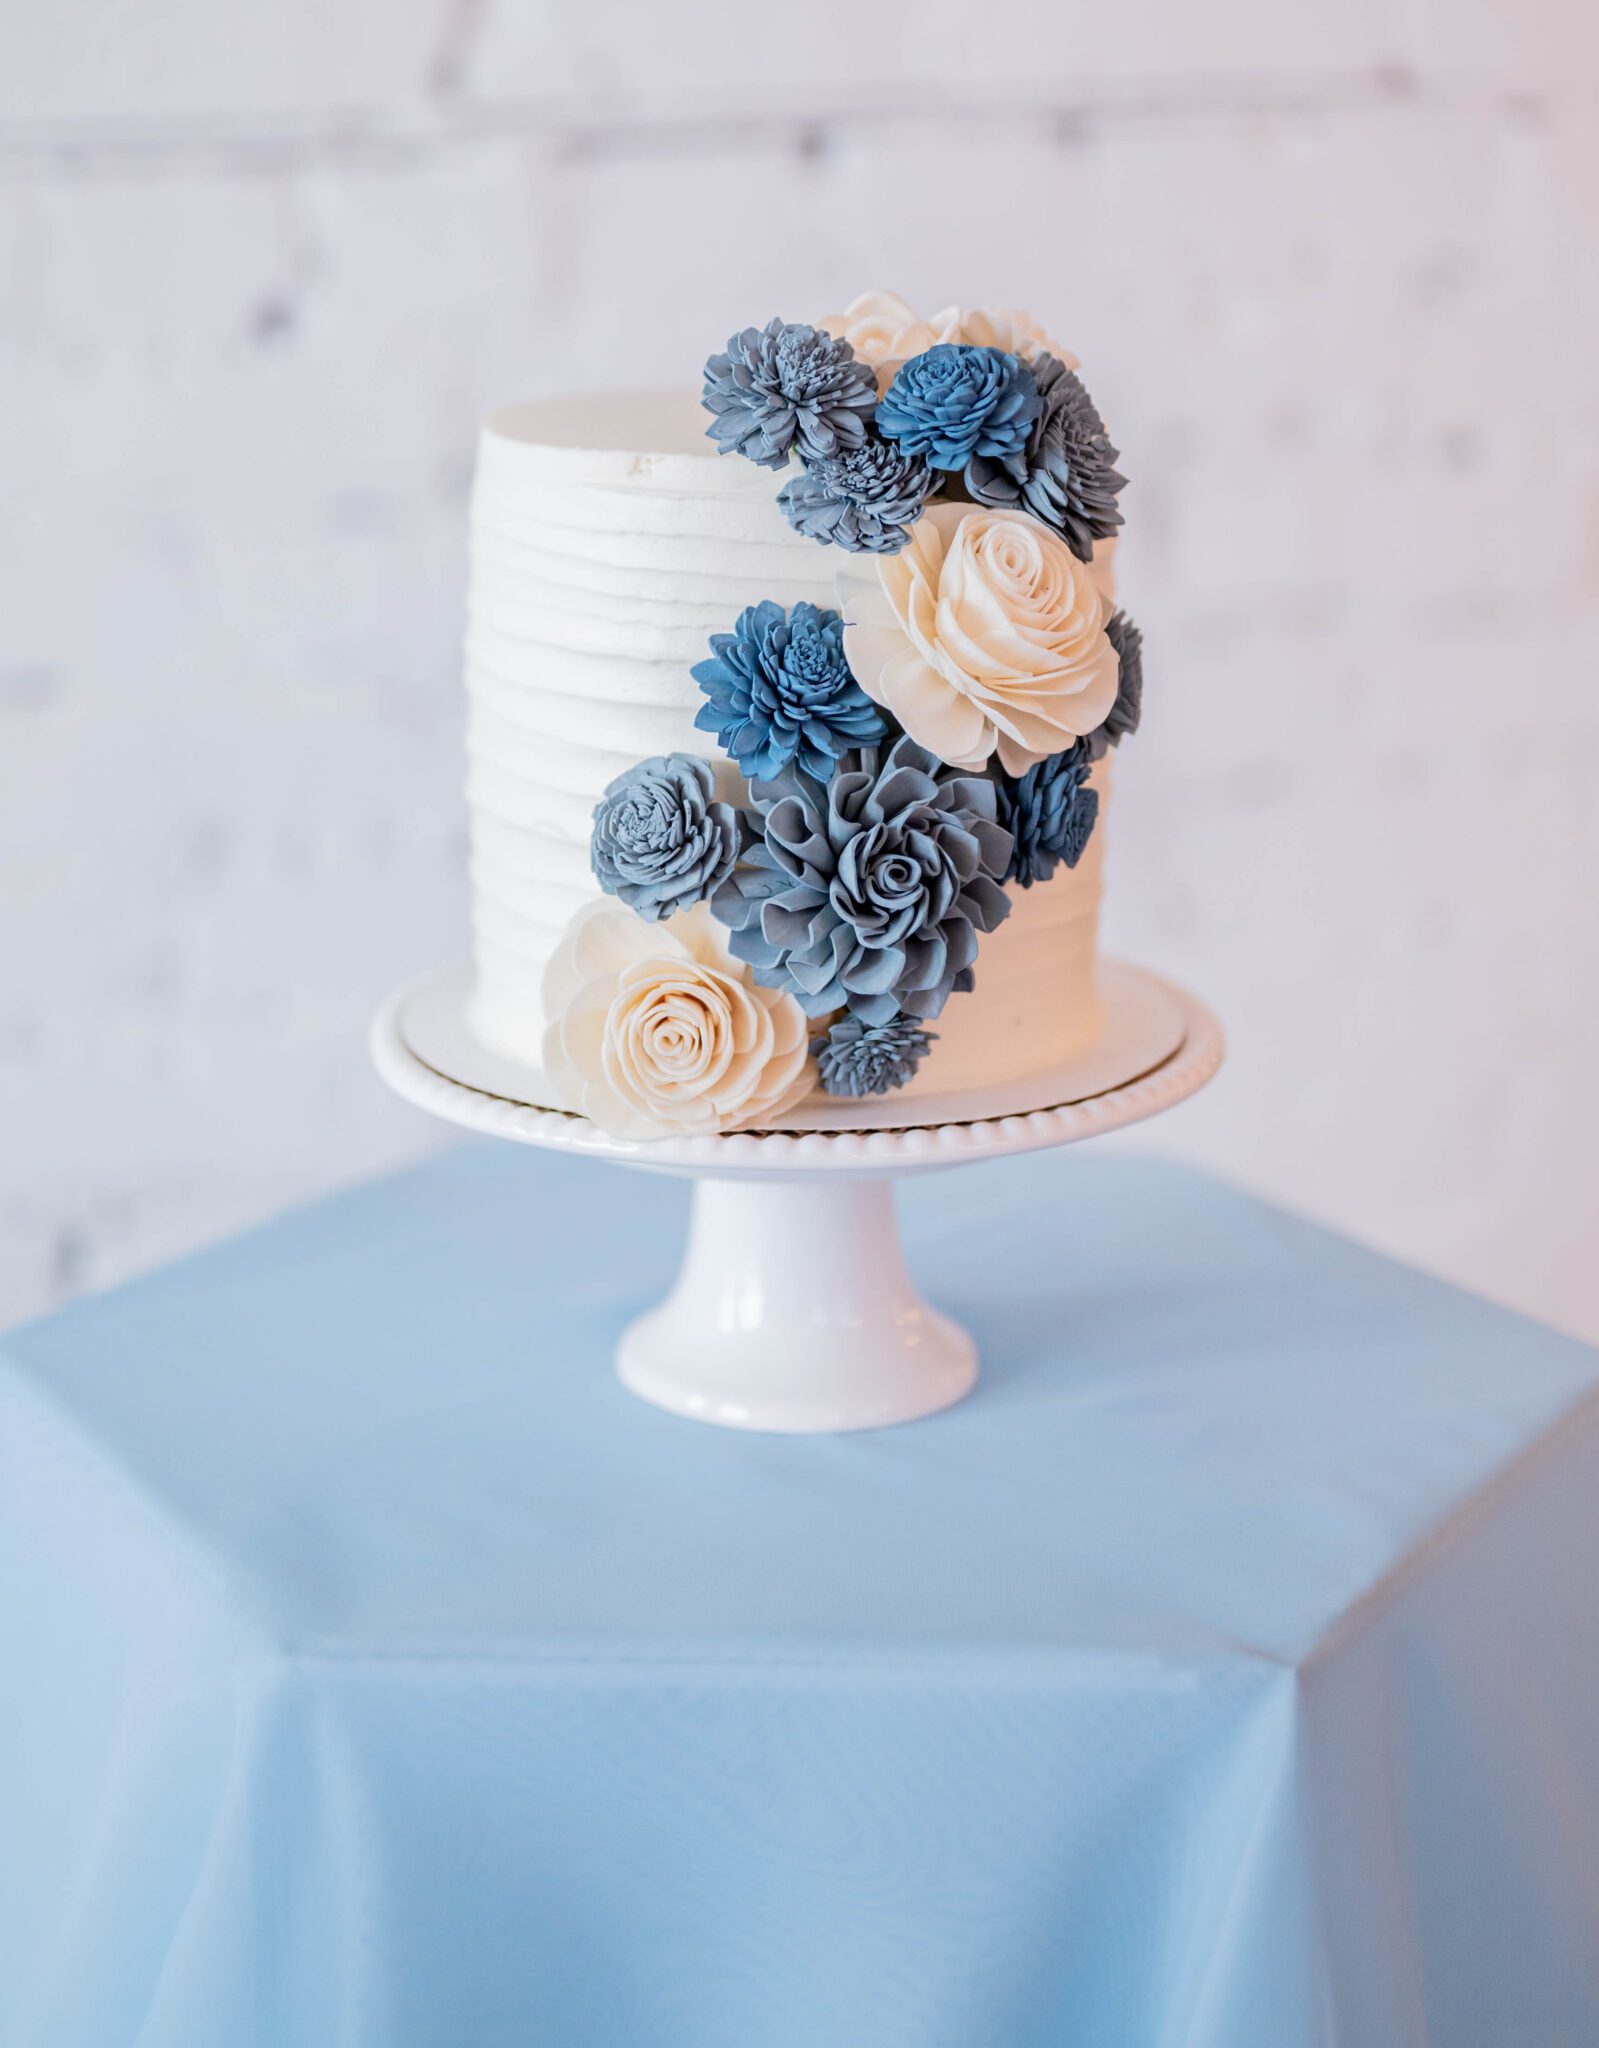 Simple and classic cake table with white cake stand and baby blue linen, single-tiered white cake with white, baby blue and dark blue edible flower decorations by Cakes by Cata